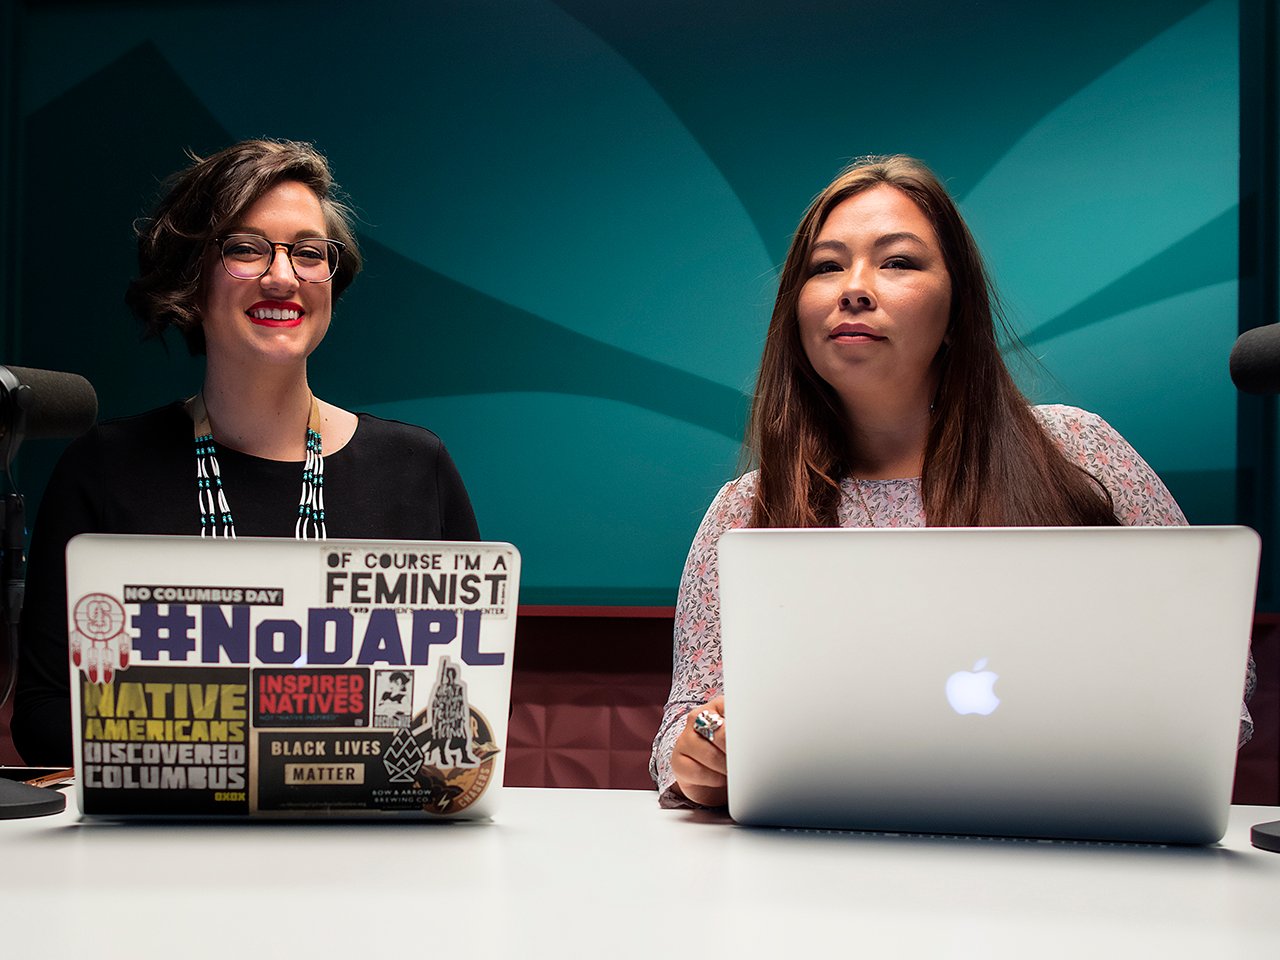 Indigenous podcasts: All My Relations hosts Adrienne Keene with laptop with stickers and Marika Wilbur with Mac laptop